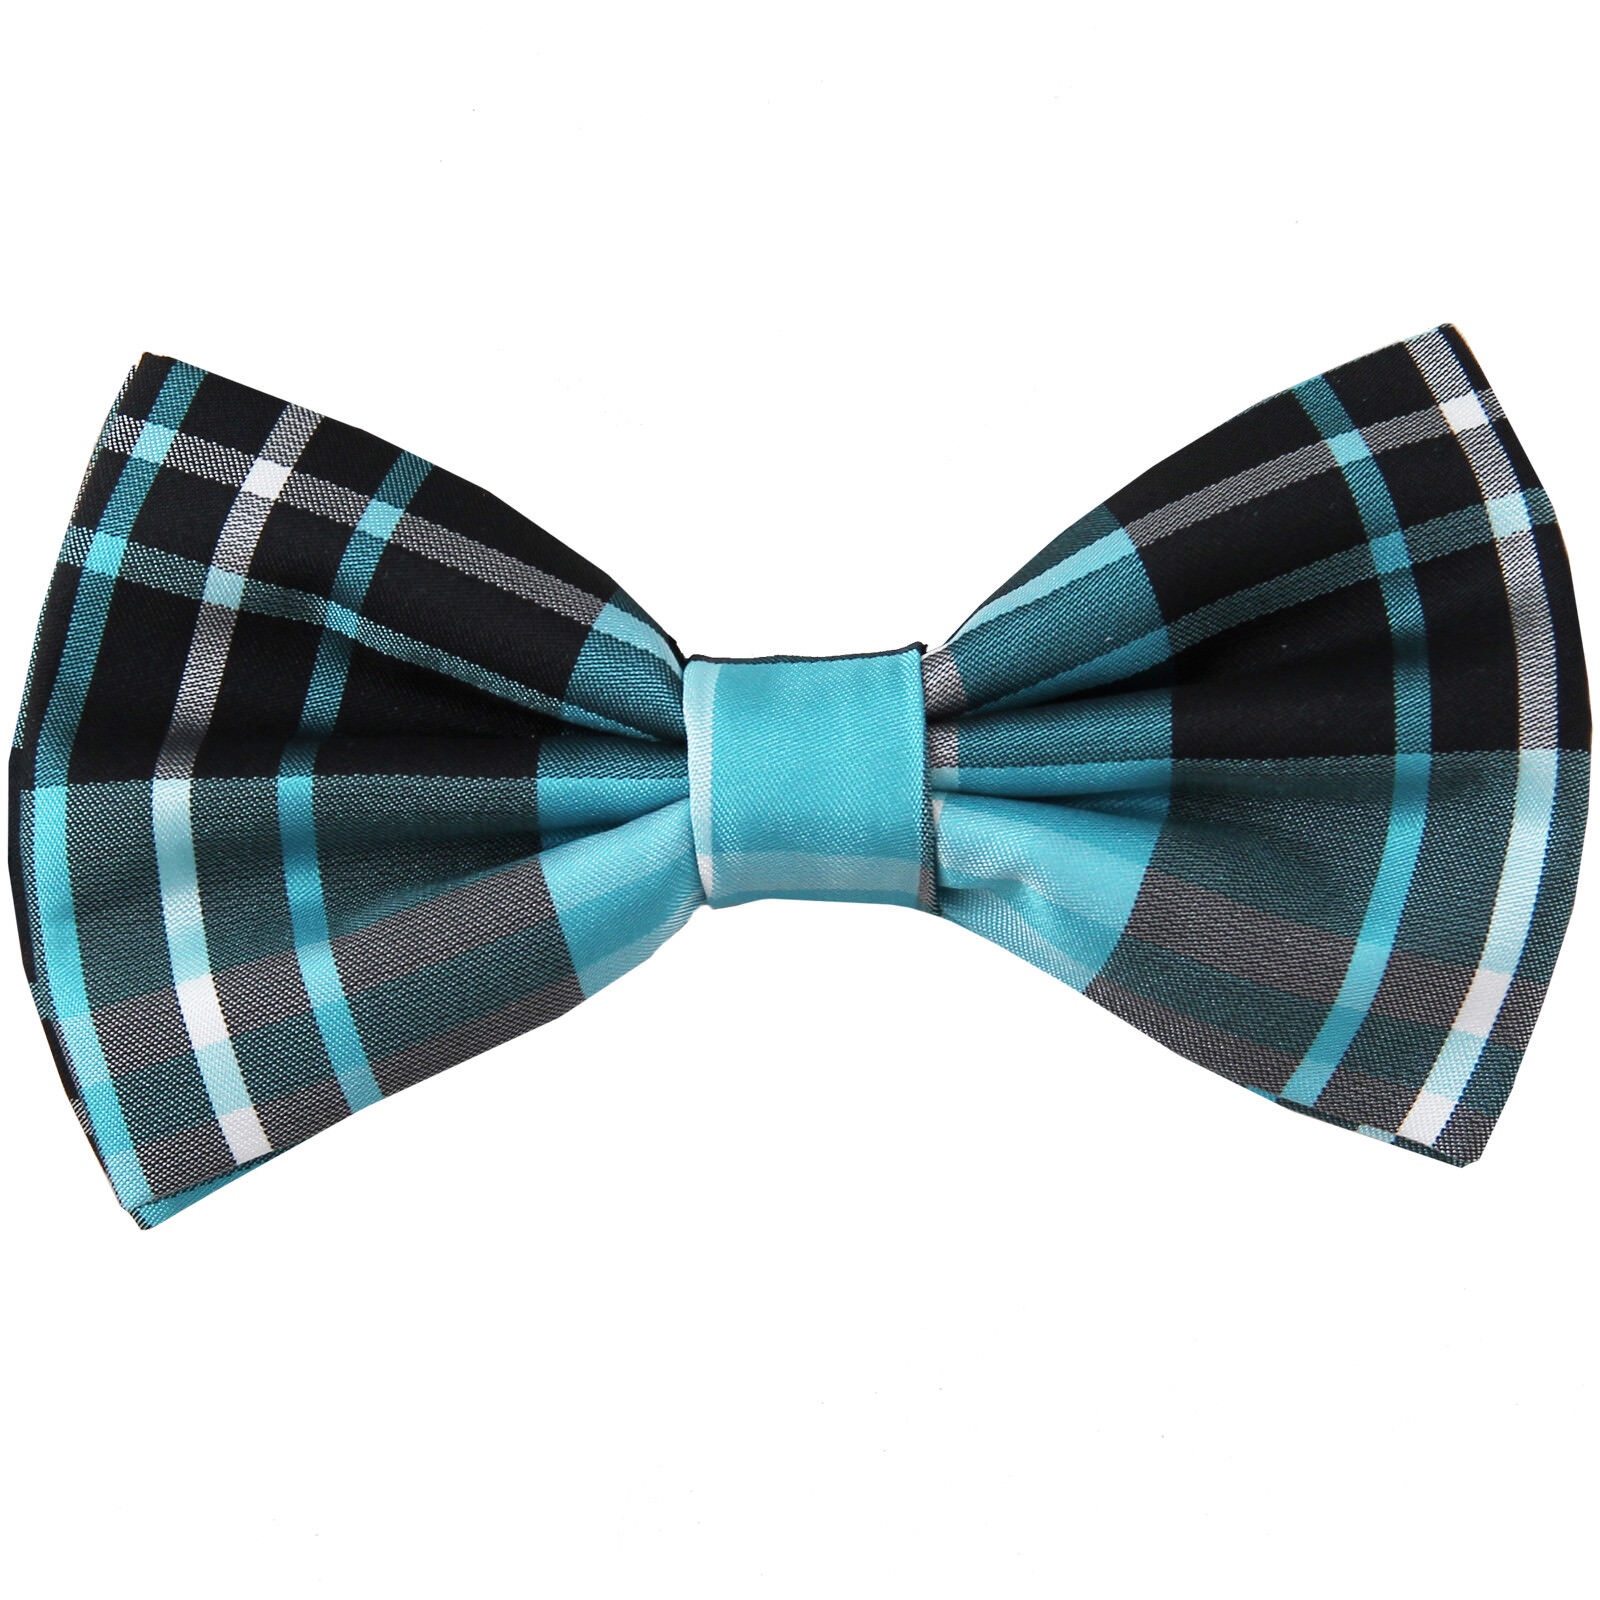 New formal Men\'s polyester pre-tied bow tie only plaids checkers turquoise blue 